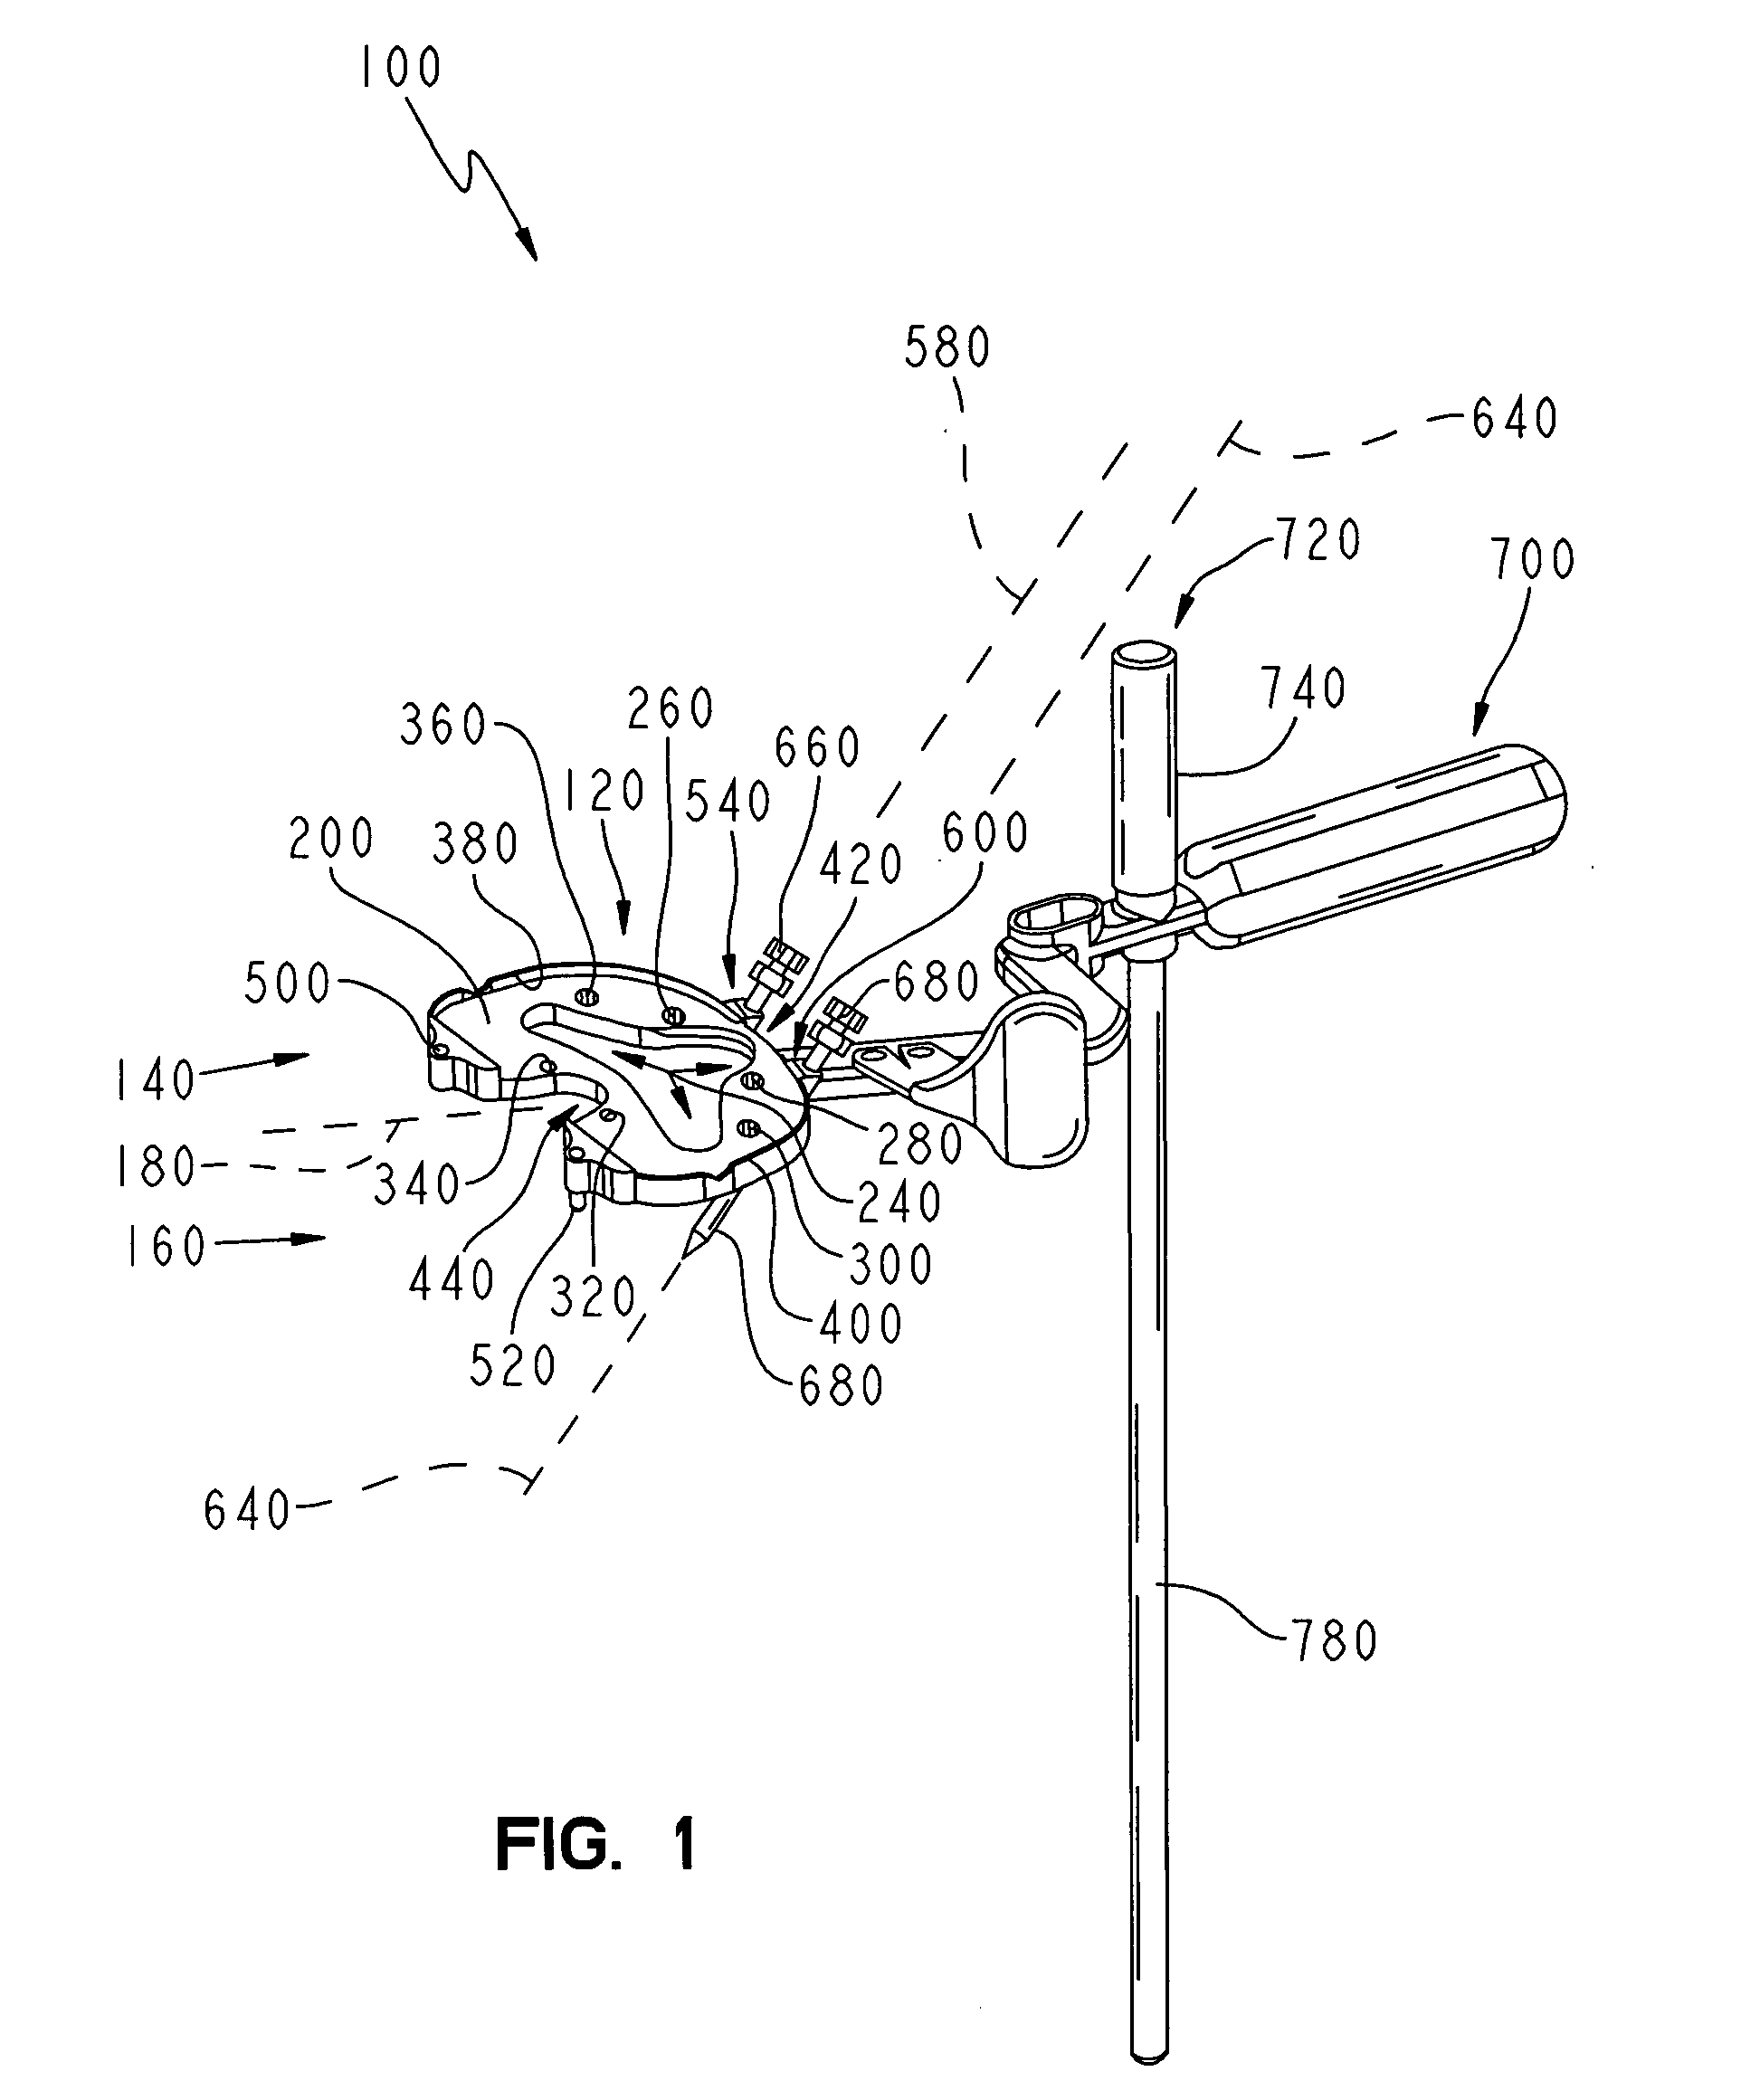 Tibial sizing apparatus and method